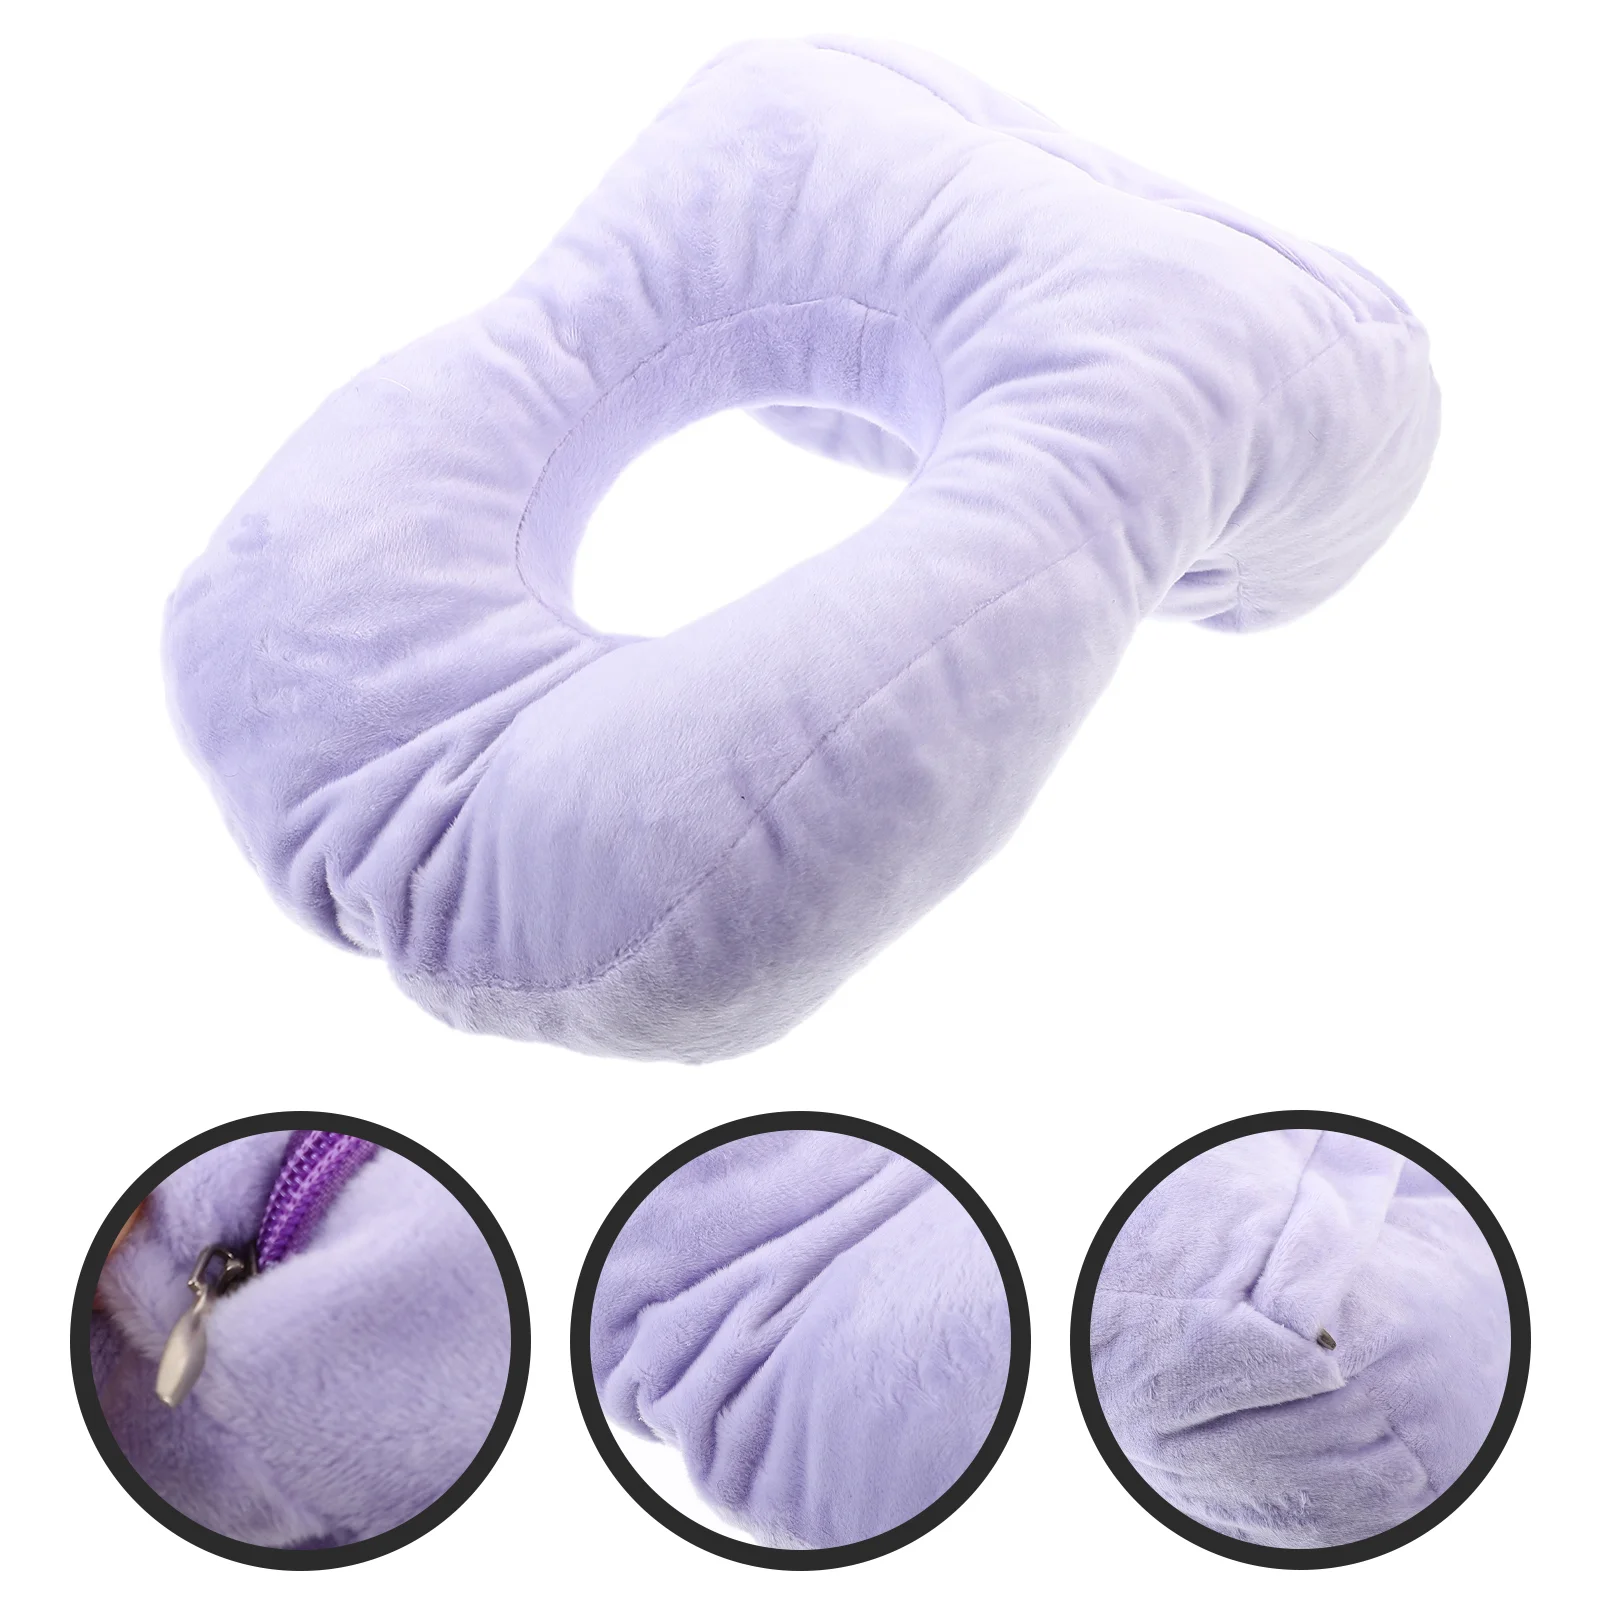 

Single Hole Ear Pillow Office Desktop Decorative Side Neck Support Sleeping Pads Convenient Nap Pillows Relaxed Accessories